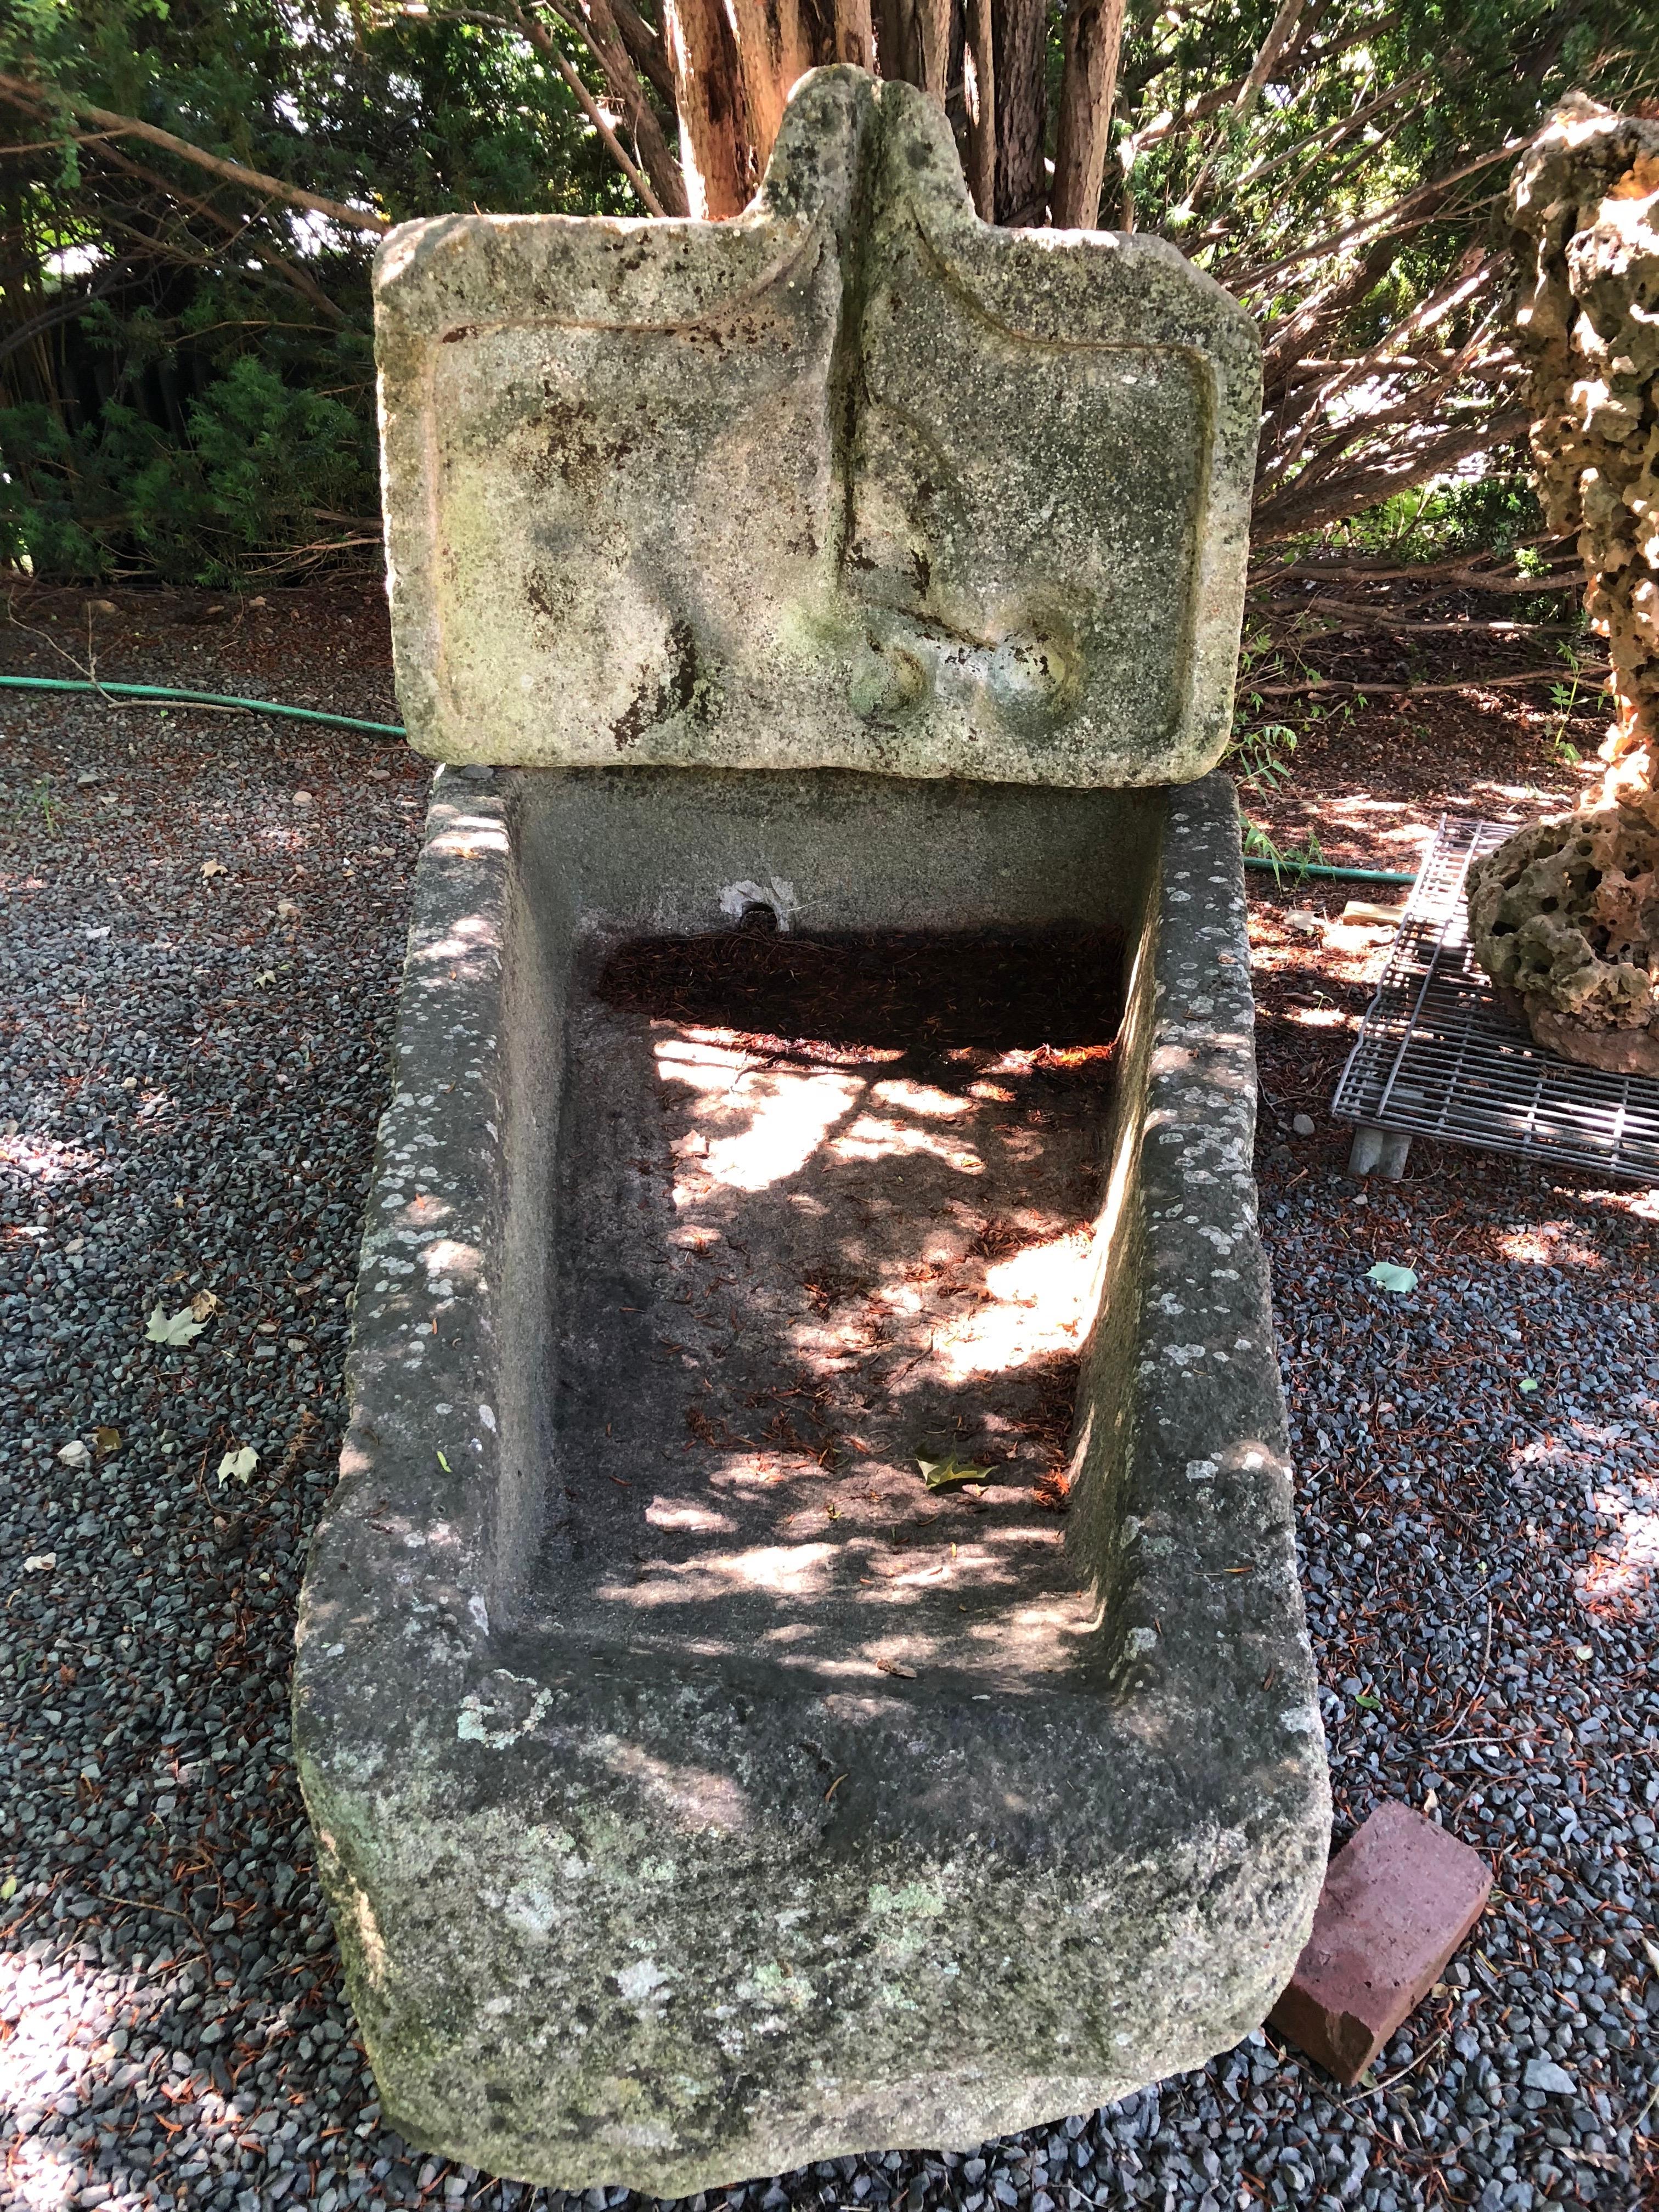 This rare and unusual keystone-shaped granite lavoir trough is from Sathe, France and dates to the 15th century. In amazing weathered condition, it has a contemporary feel because of its shape and color and would make an stunning focal point in your